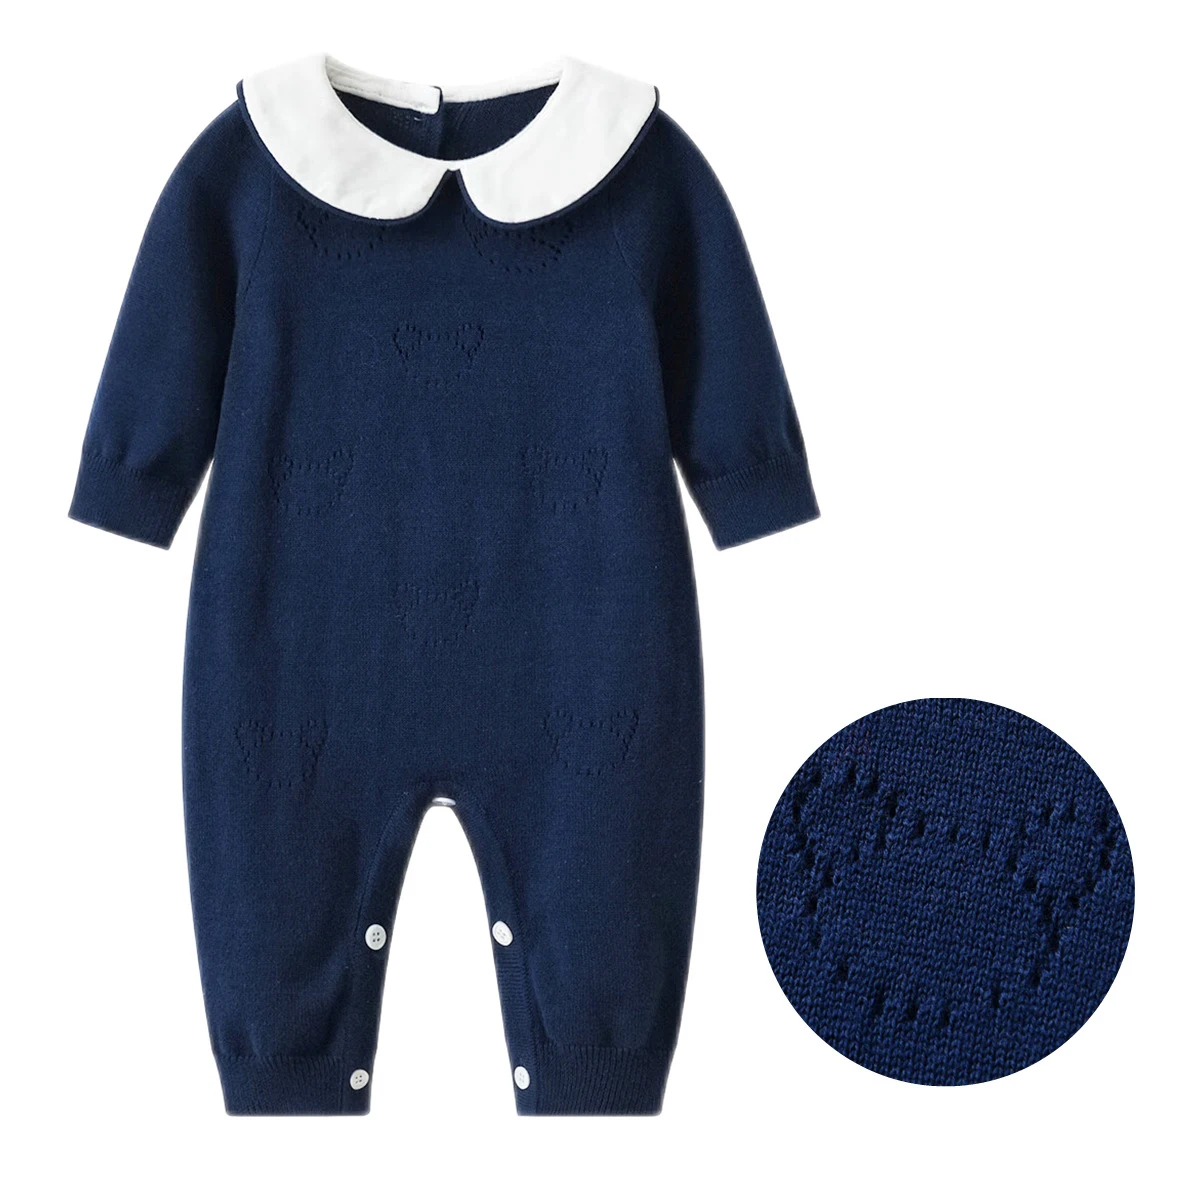 

Newborn Baby Rompers Long Sleeve Turtle Neck Infant Kids Boys Navy Jumpsuits Playsuits Autumn Winter Knit Toddler Overalls 0-2Yr